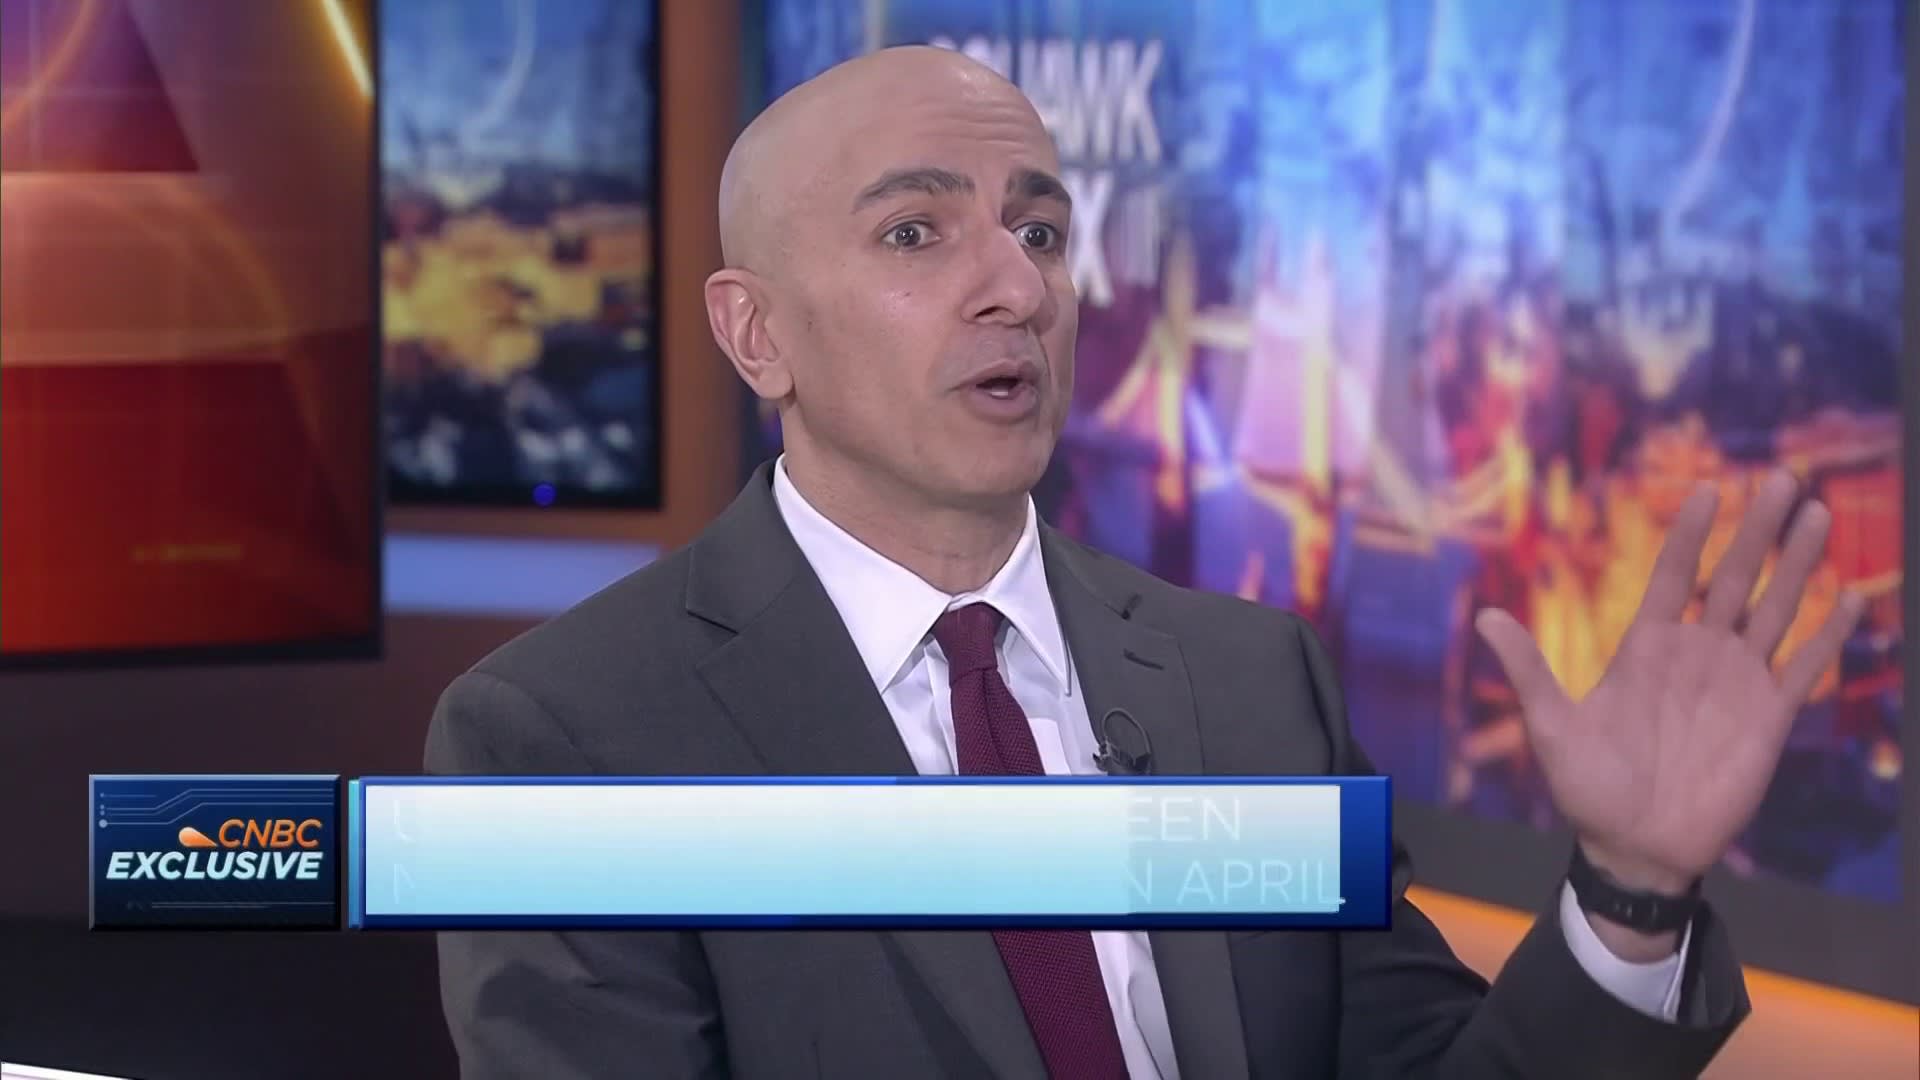 No need to hurry into rate cuts, Fed's Kashkari says: 'We should take our time and get it right'